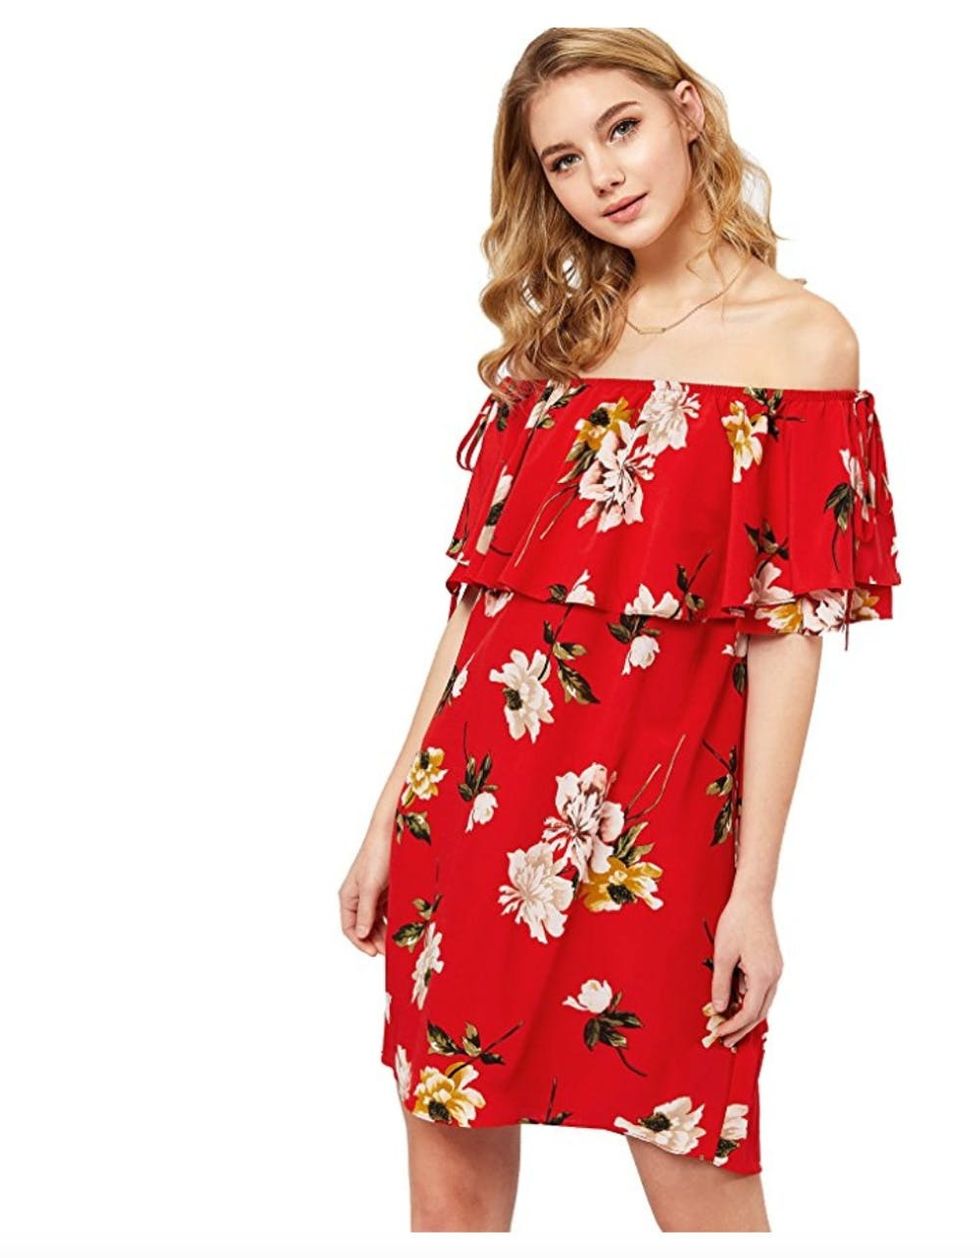 12 Affordable Spring Wedding Guest Dresses You Can Score on Amazon ...